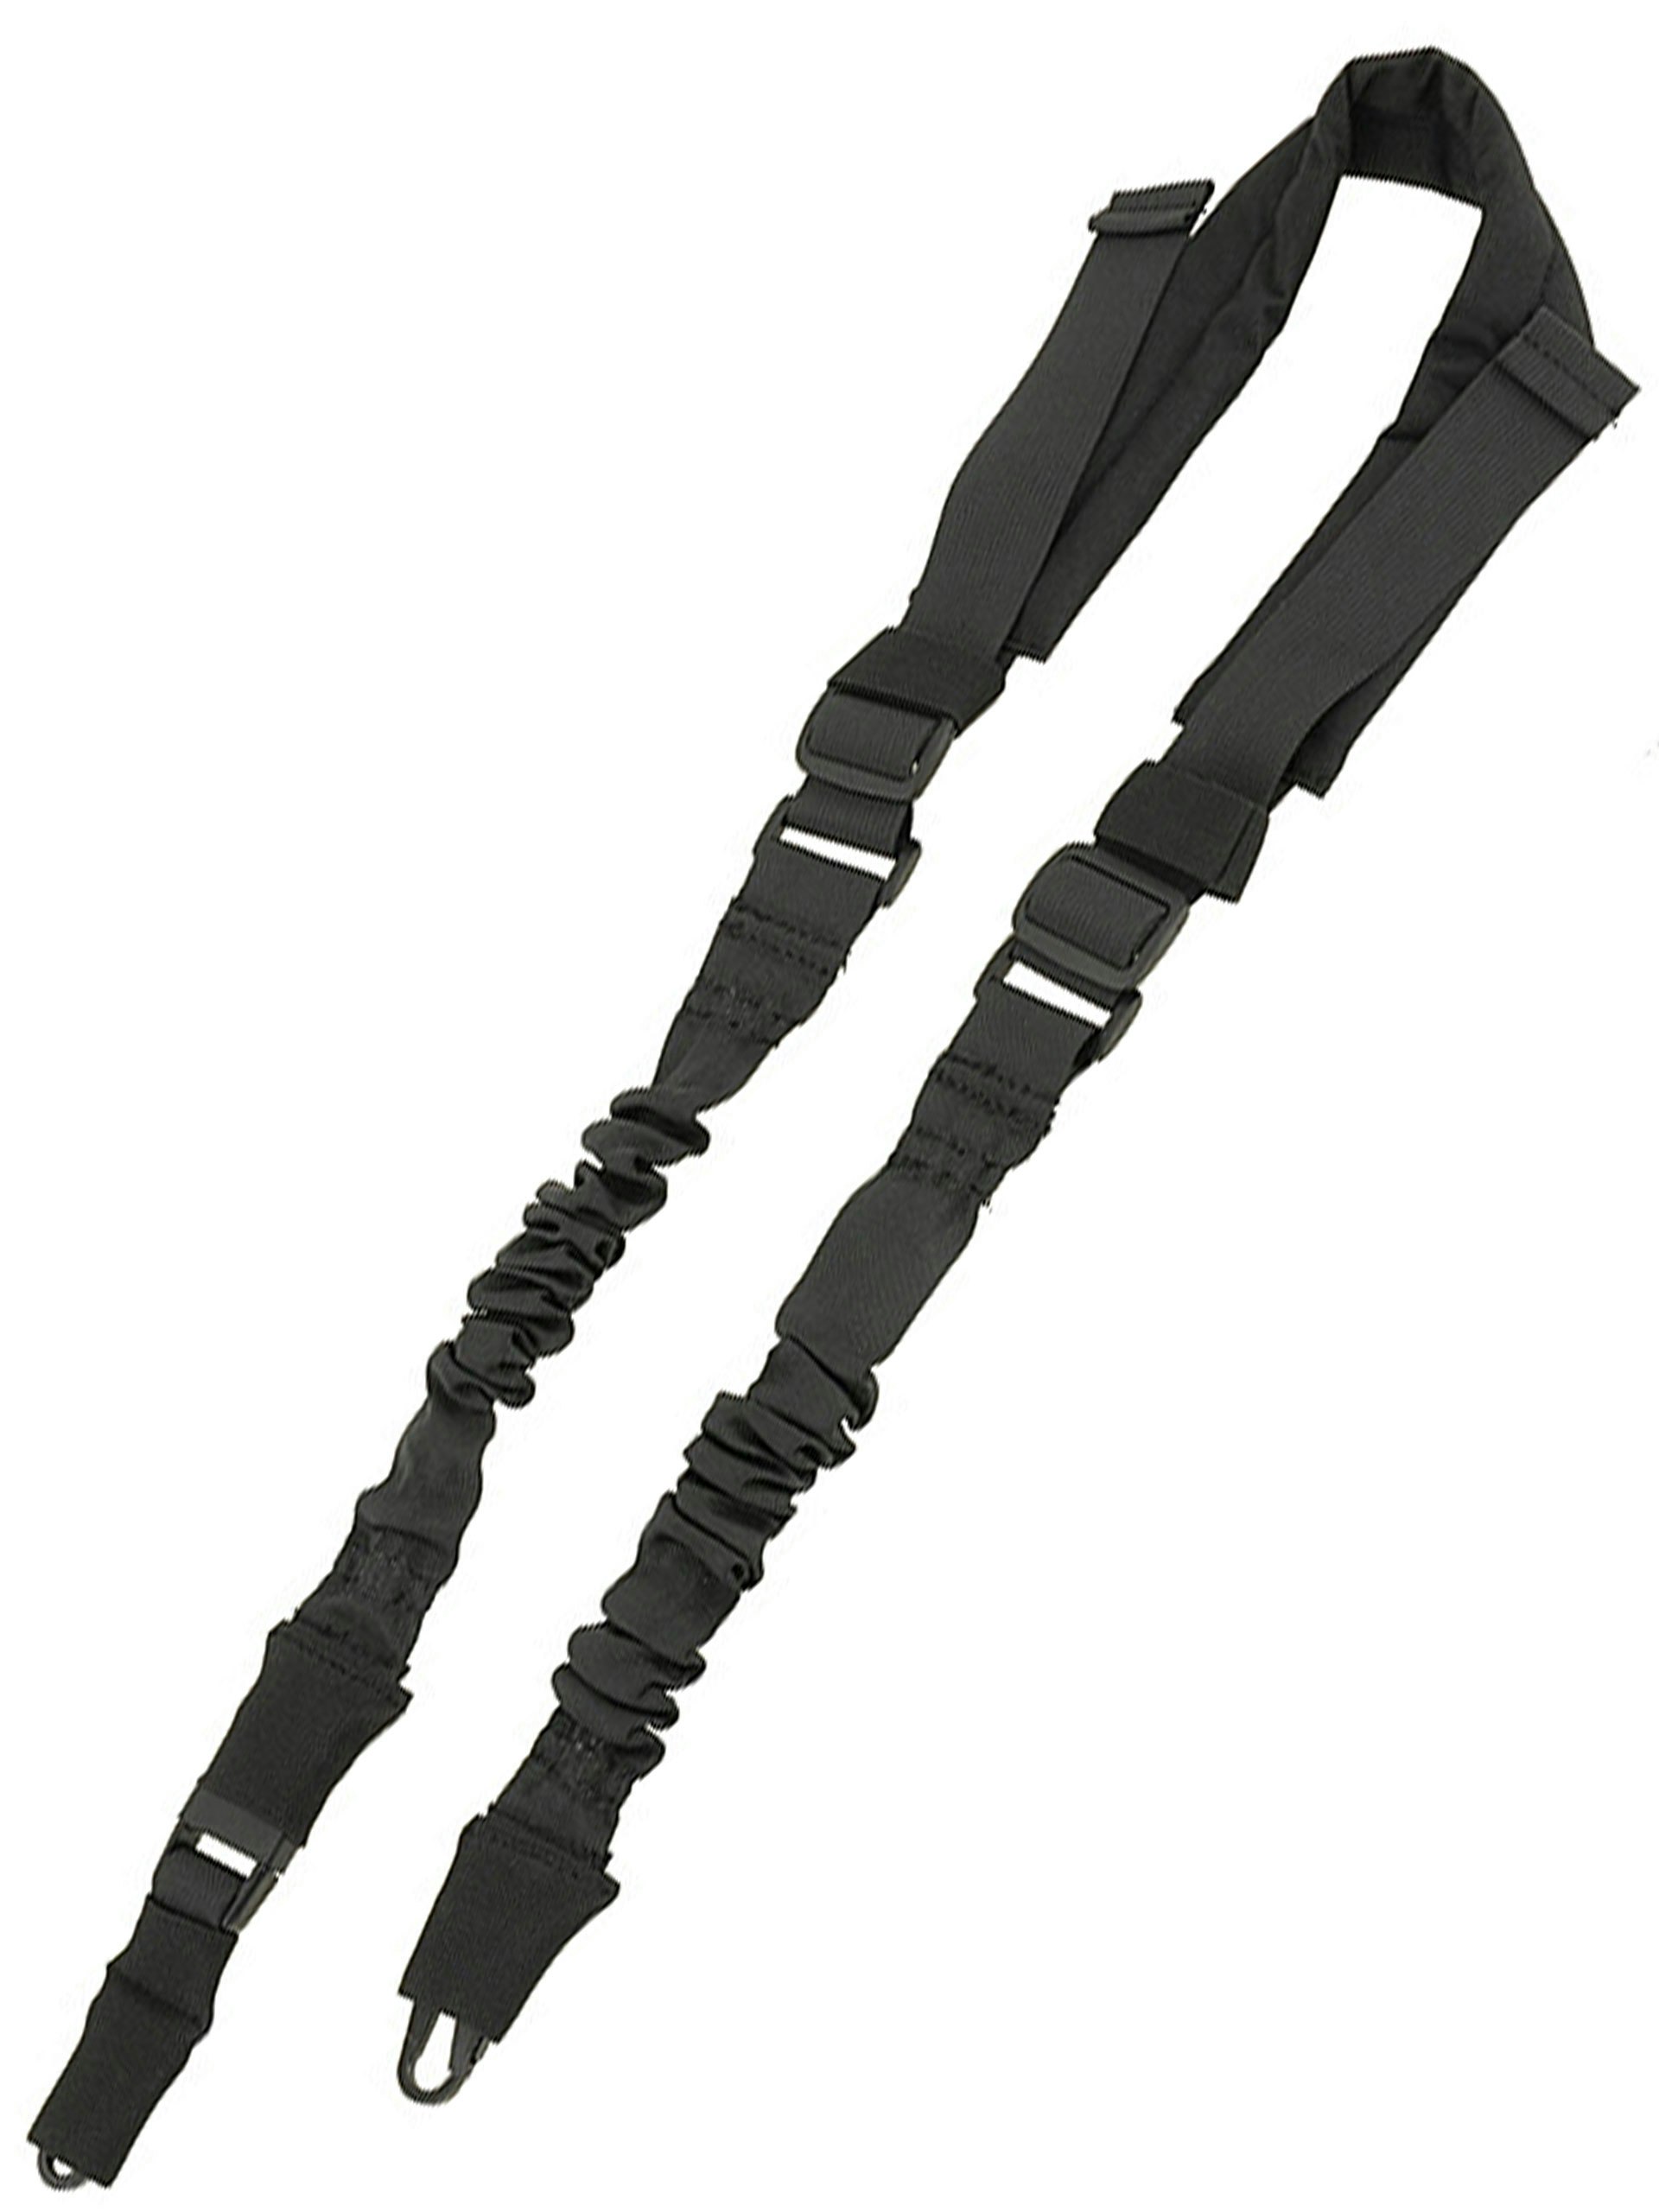 8fields Tactical Two Point Bungee Padded Rifle Sling